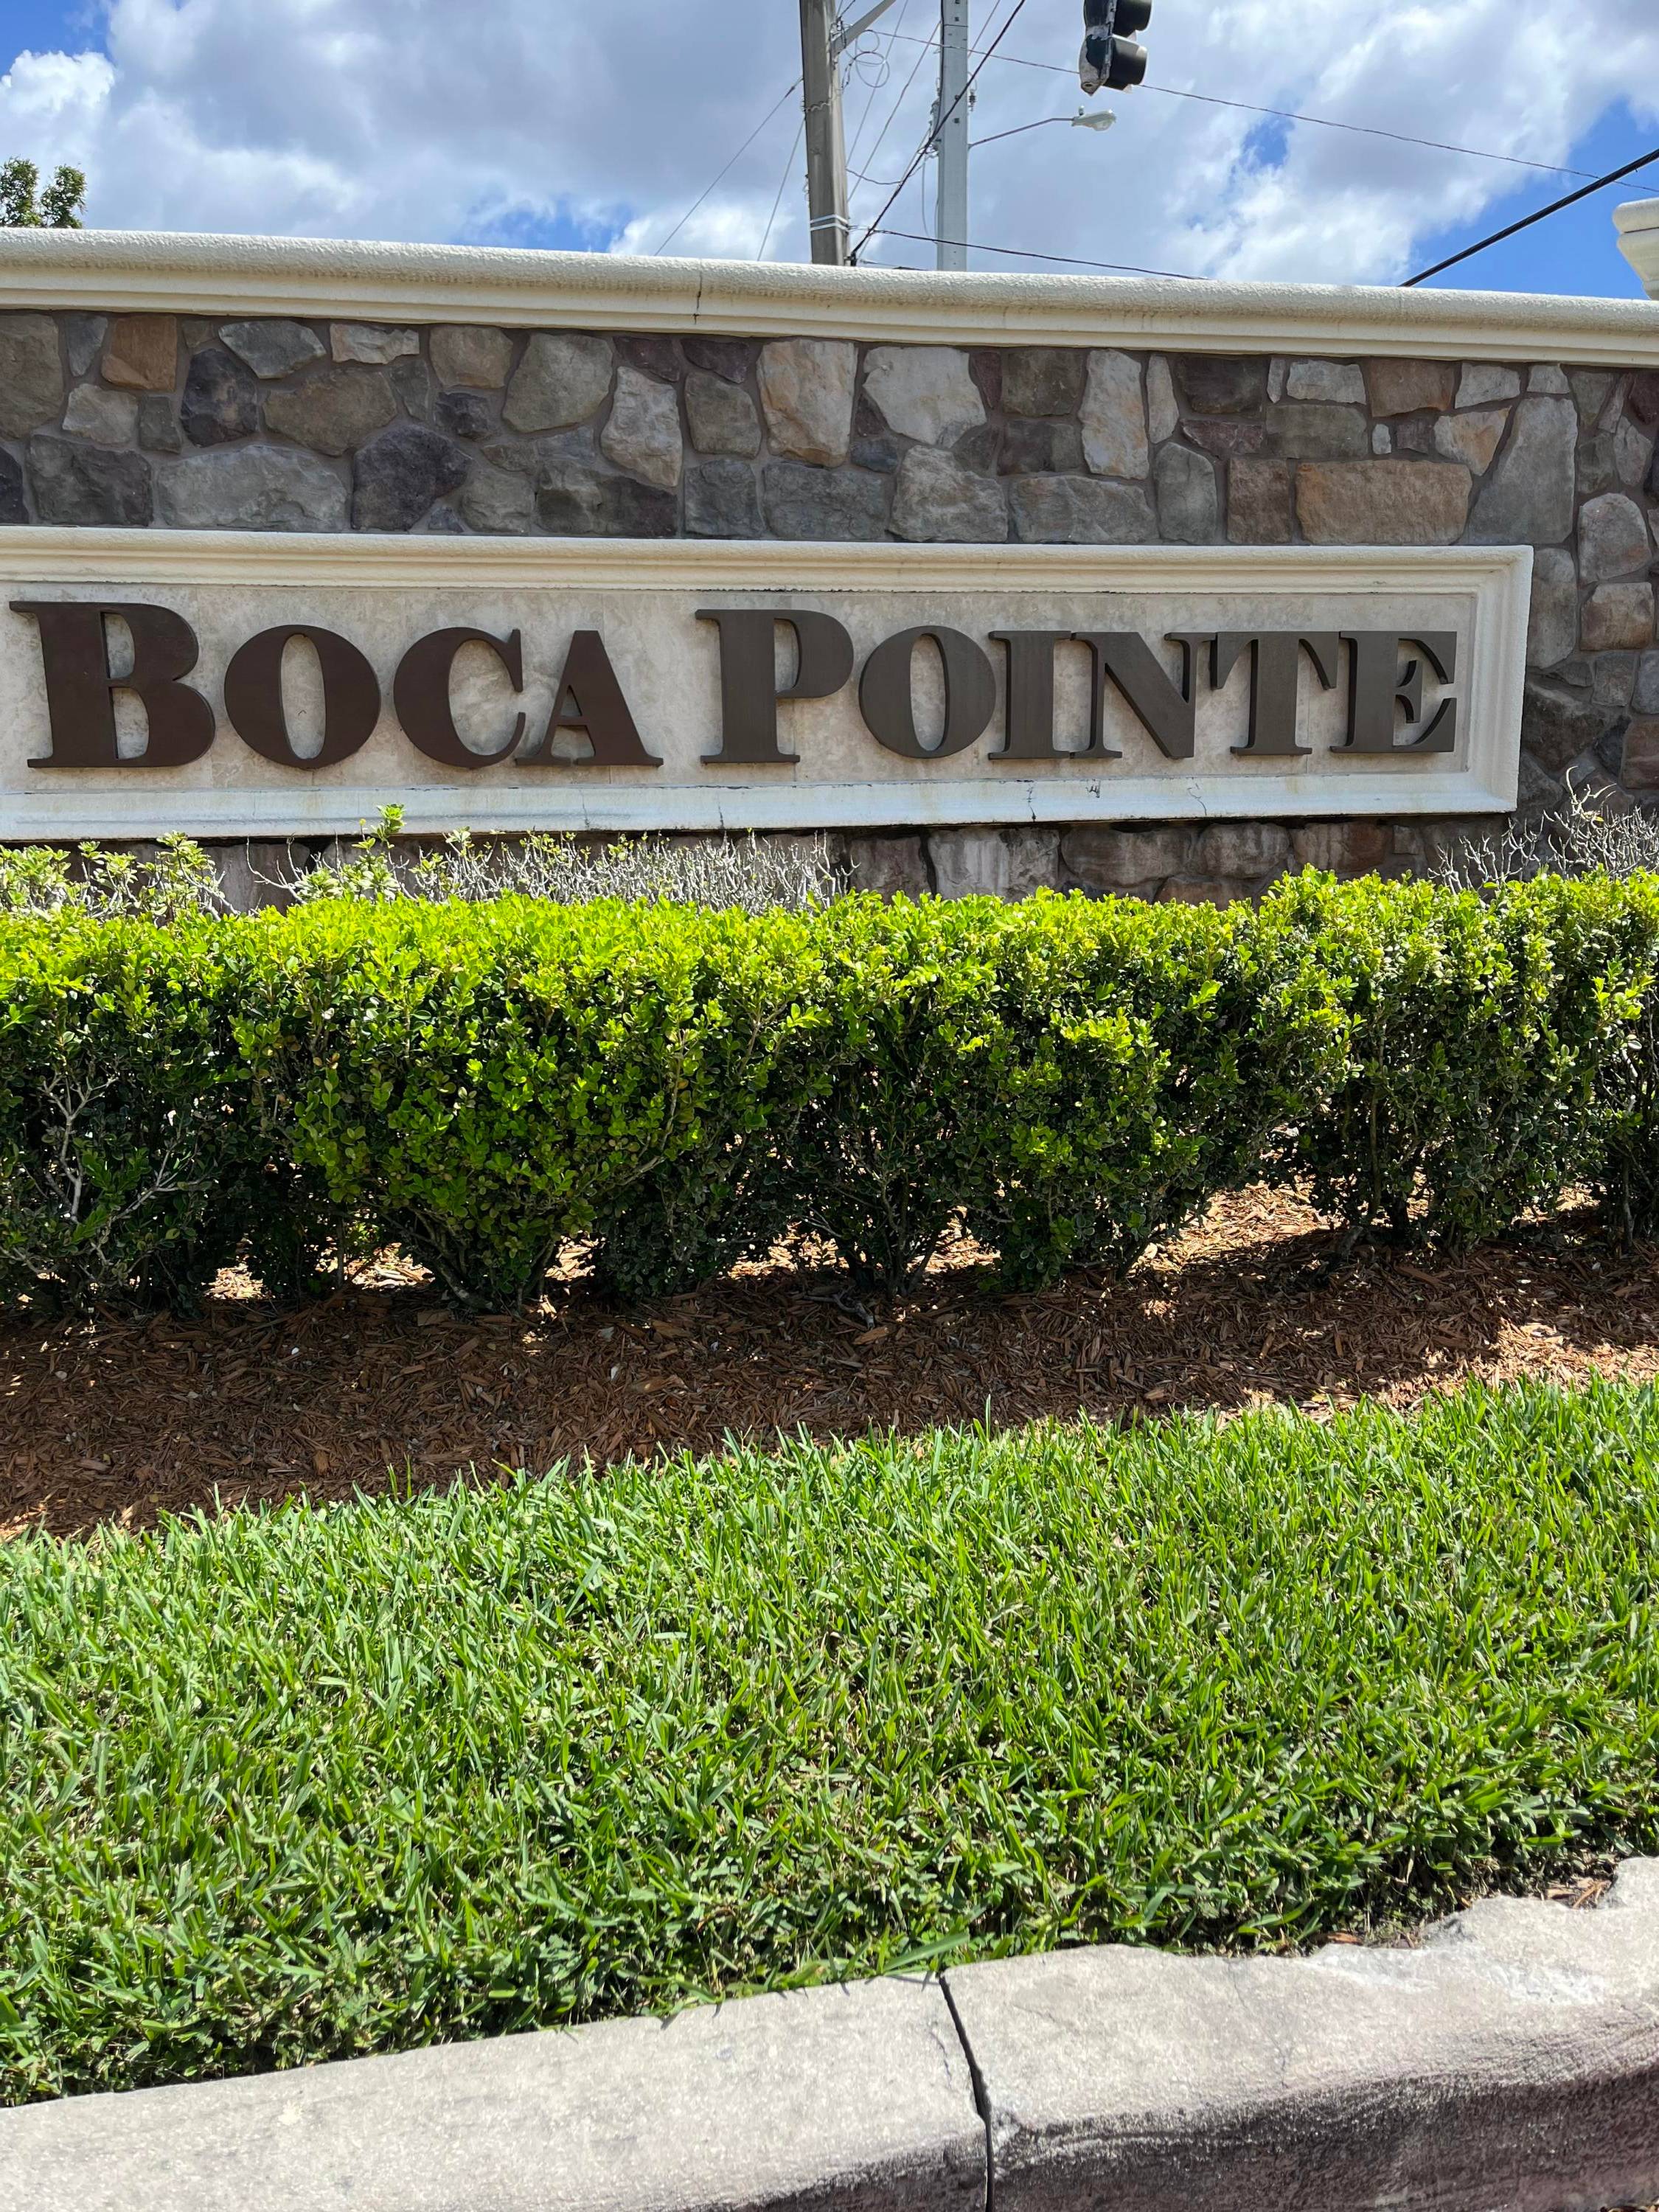 GREAT OPPORTUNITY TO BUY INTO BEAUTIFUL BOCA POINTE.